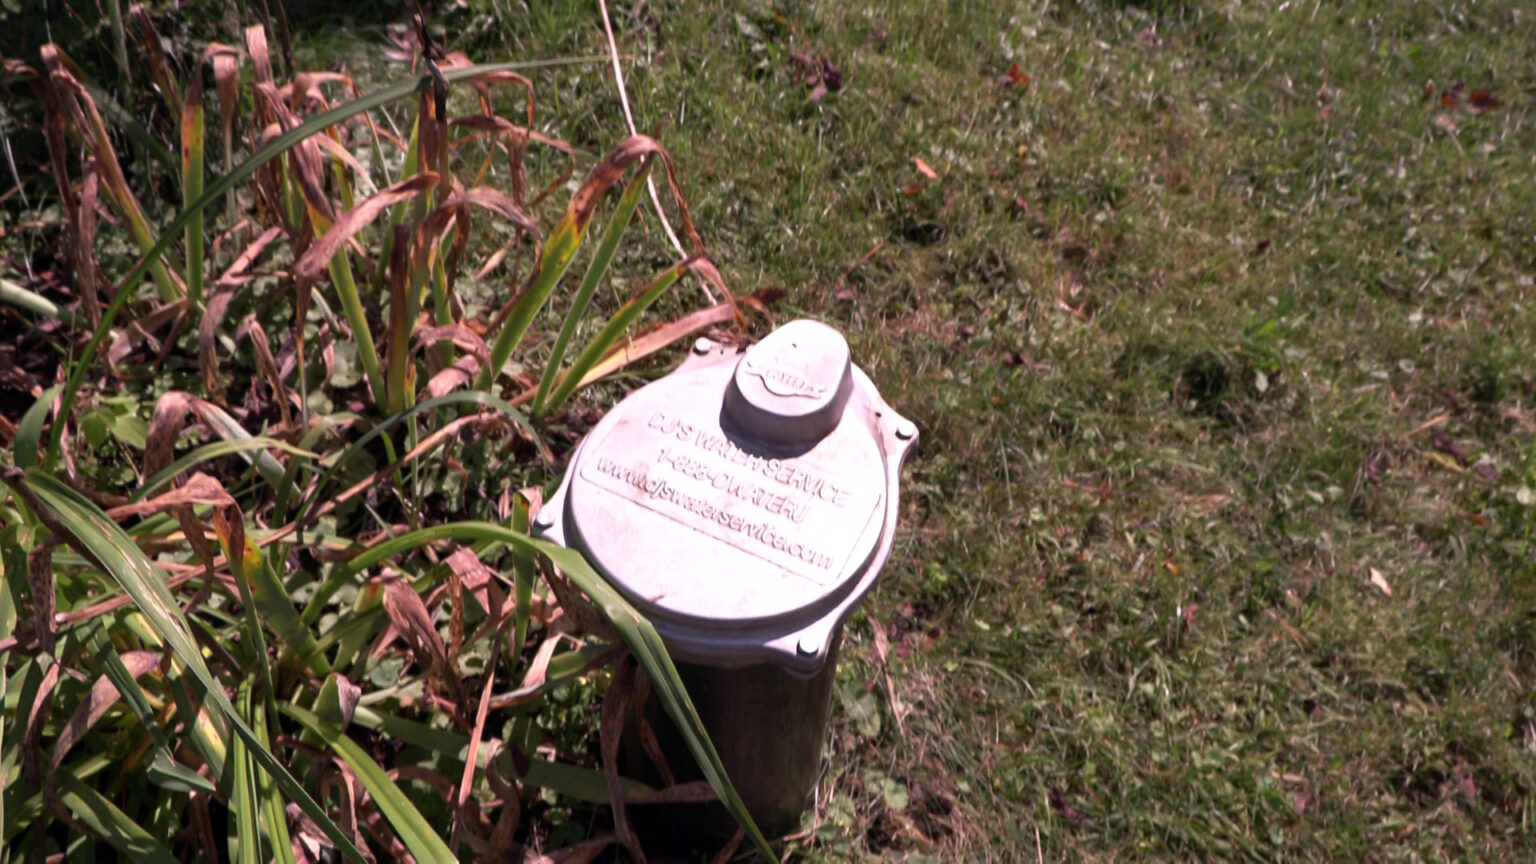 Sunlight illuminates a metal cap on a water well head situated next to ground foliage in a lawn.